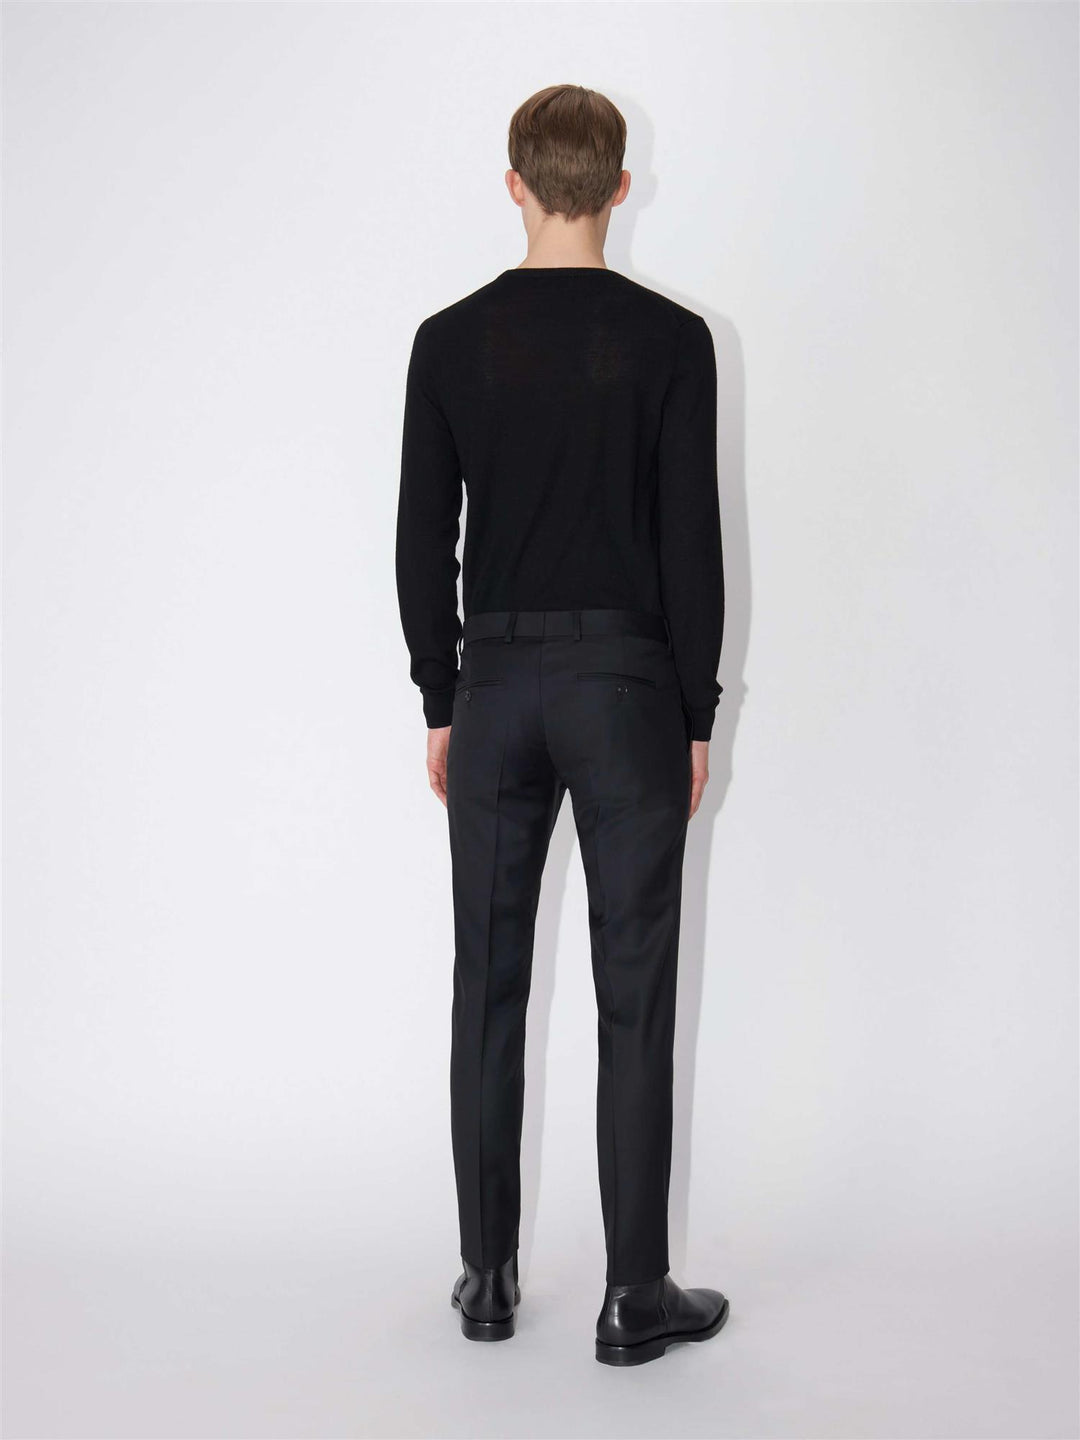 TAIN TROUSERS  Black